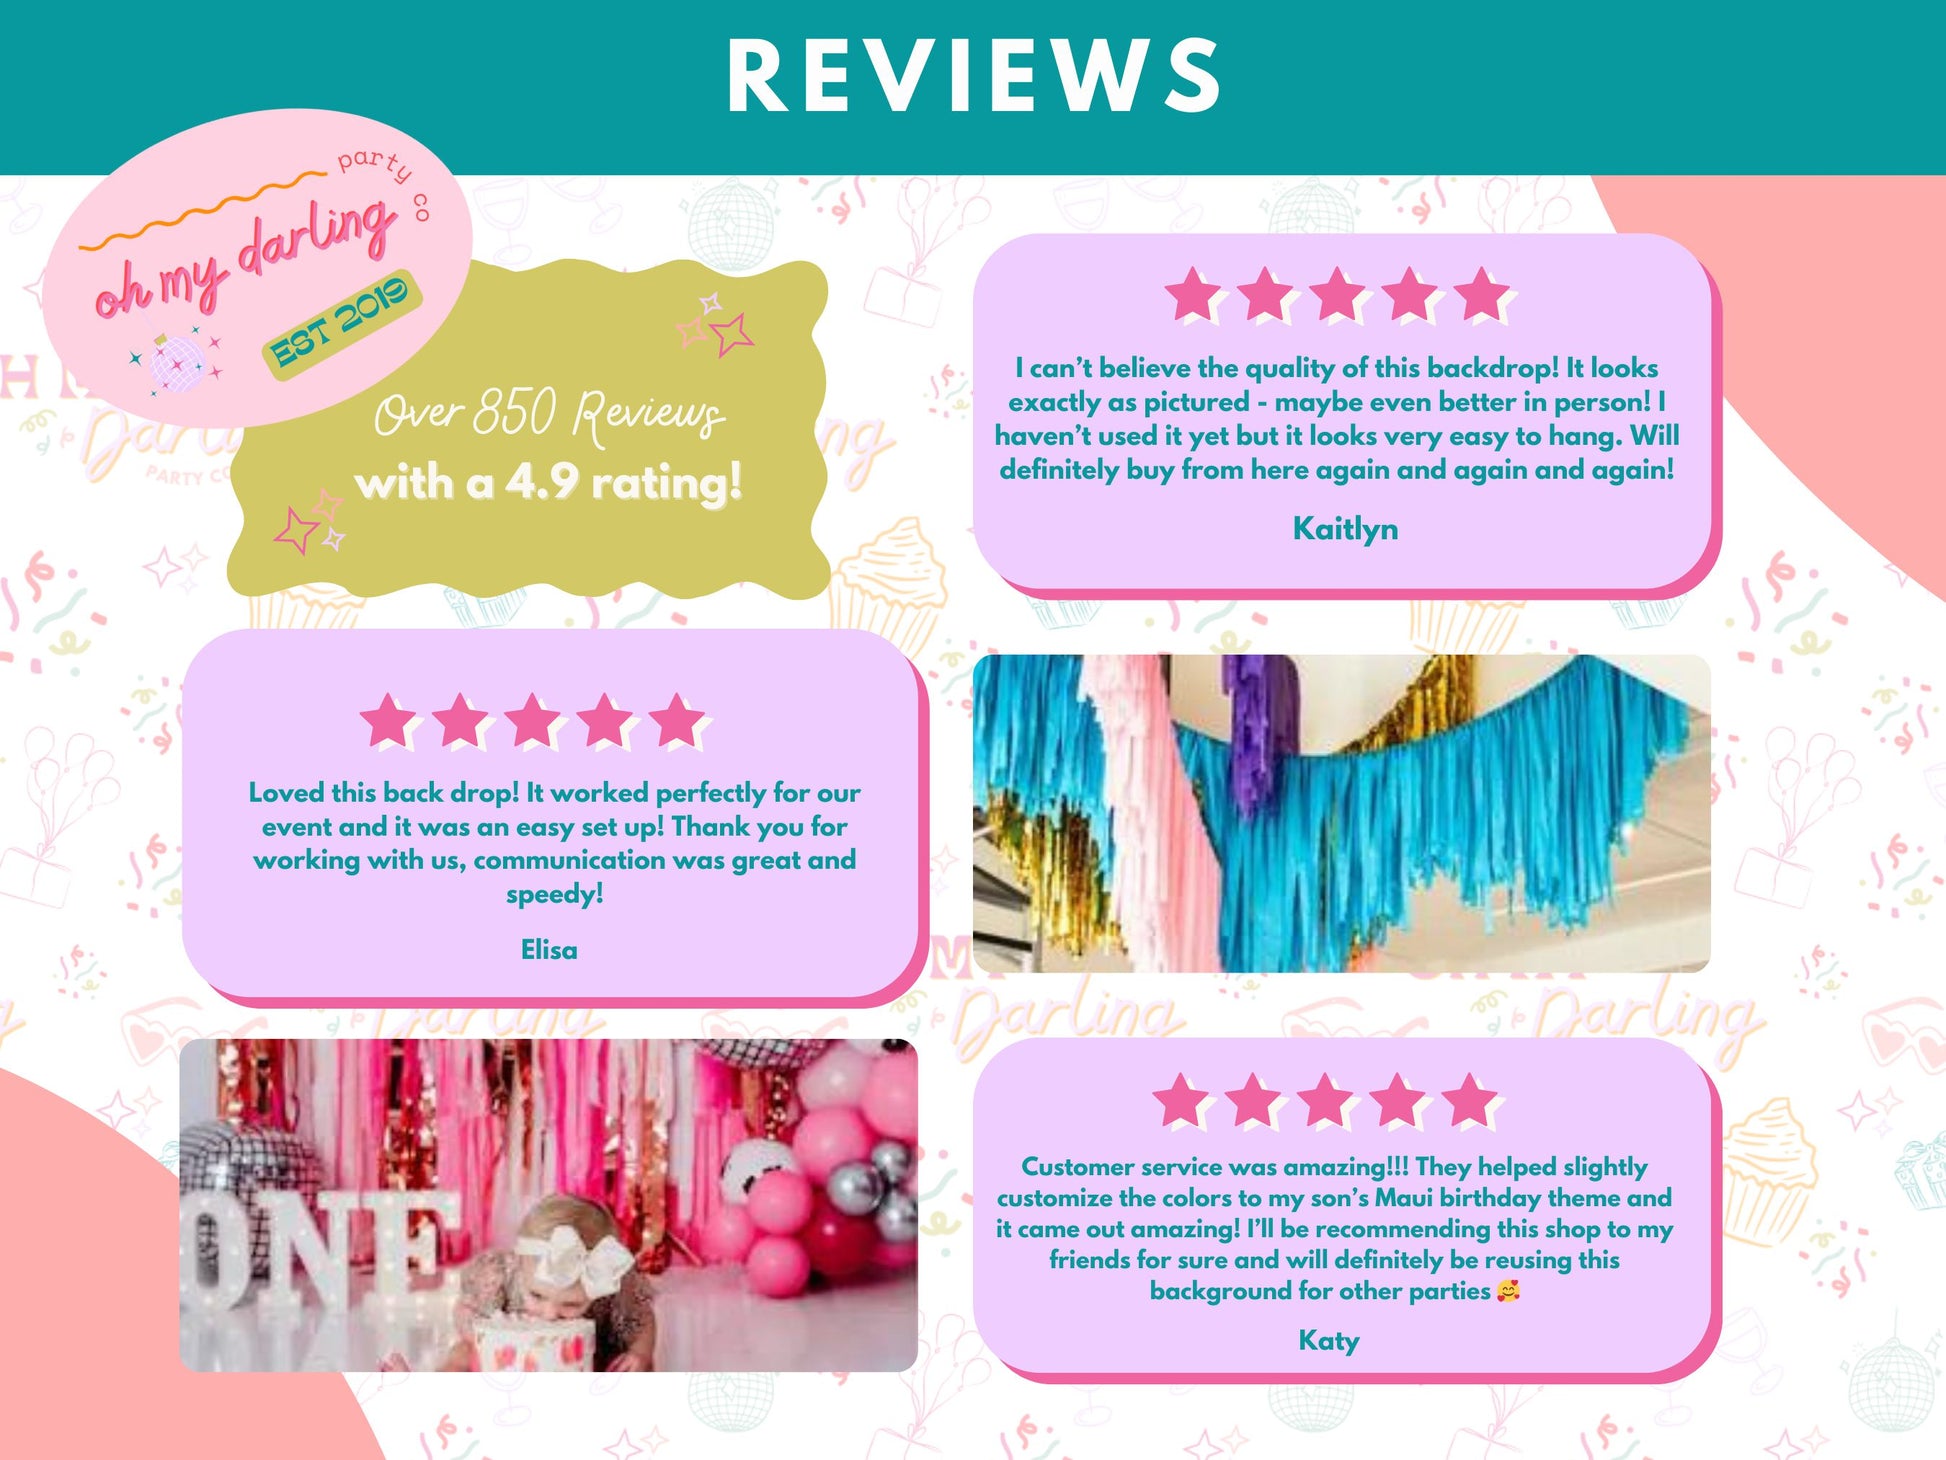 Mermaid Shellebrate Fringe Backdrop-Fringe Backdrop-Party Decor-Oh My Darling Party Co-Oh My Darling Party Co-backdrops for party, balloon garlands, be mine, be my valentine, beach, Beach House, bermuda, blue, BLUE BACKDROP, BLUE BACKDROPS, blue party, butterfly, candy pink, default, donuts, fringe garland, Fringe Streamers, girl party, iridescent, last splash, lavender, lavender birthday, light blue, mermaid, mermaid party, mermaids, metalic silver, metallic iridescent, metallic silver, mint, ocean, OMDPC,